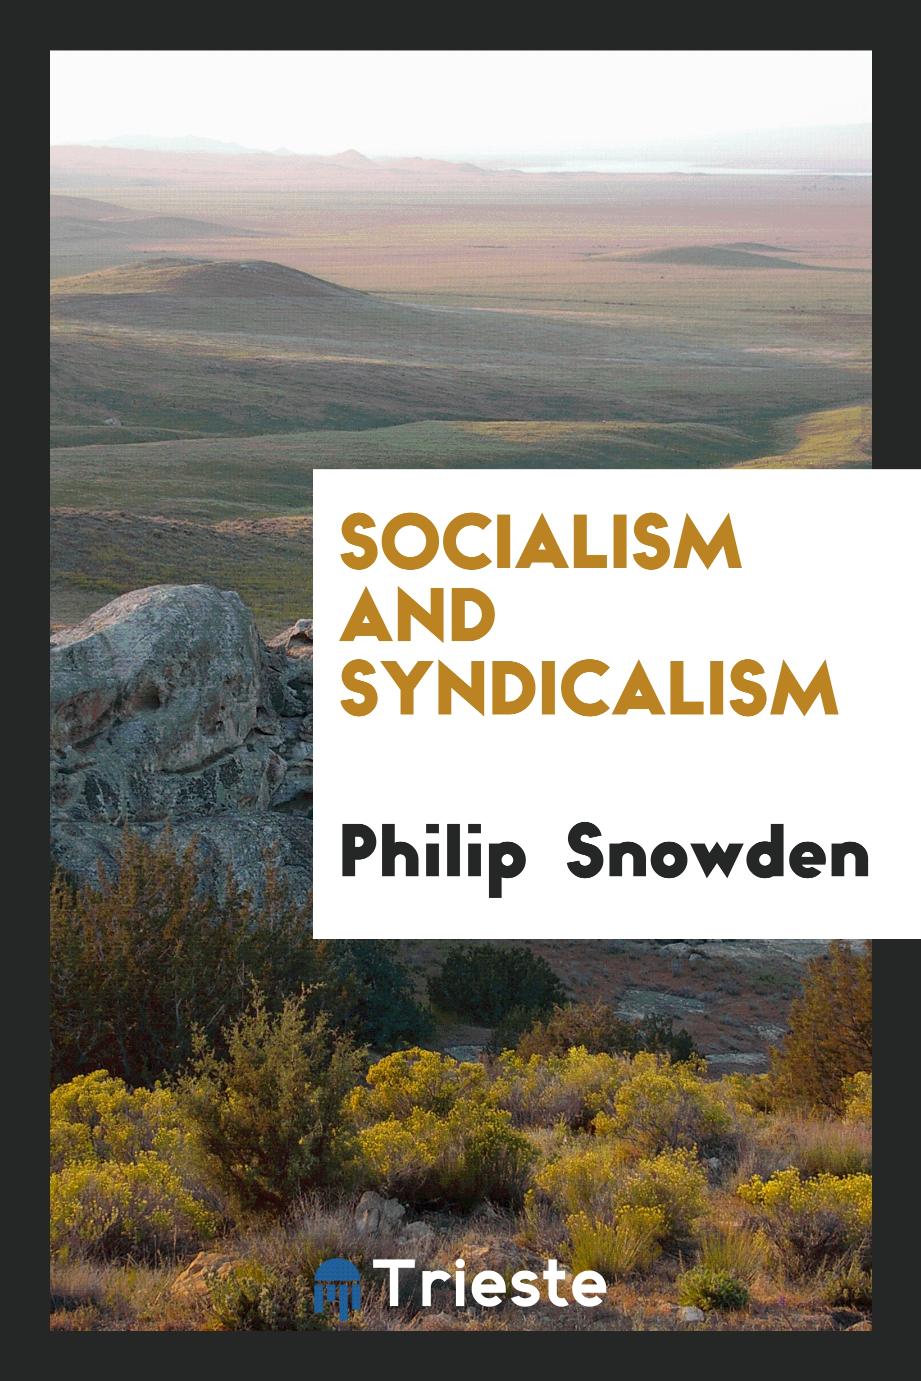 Socialism and syndicalism